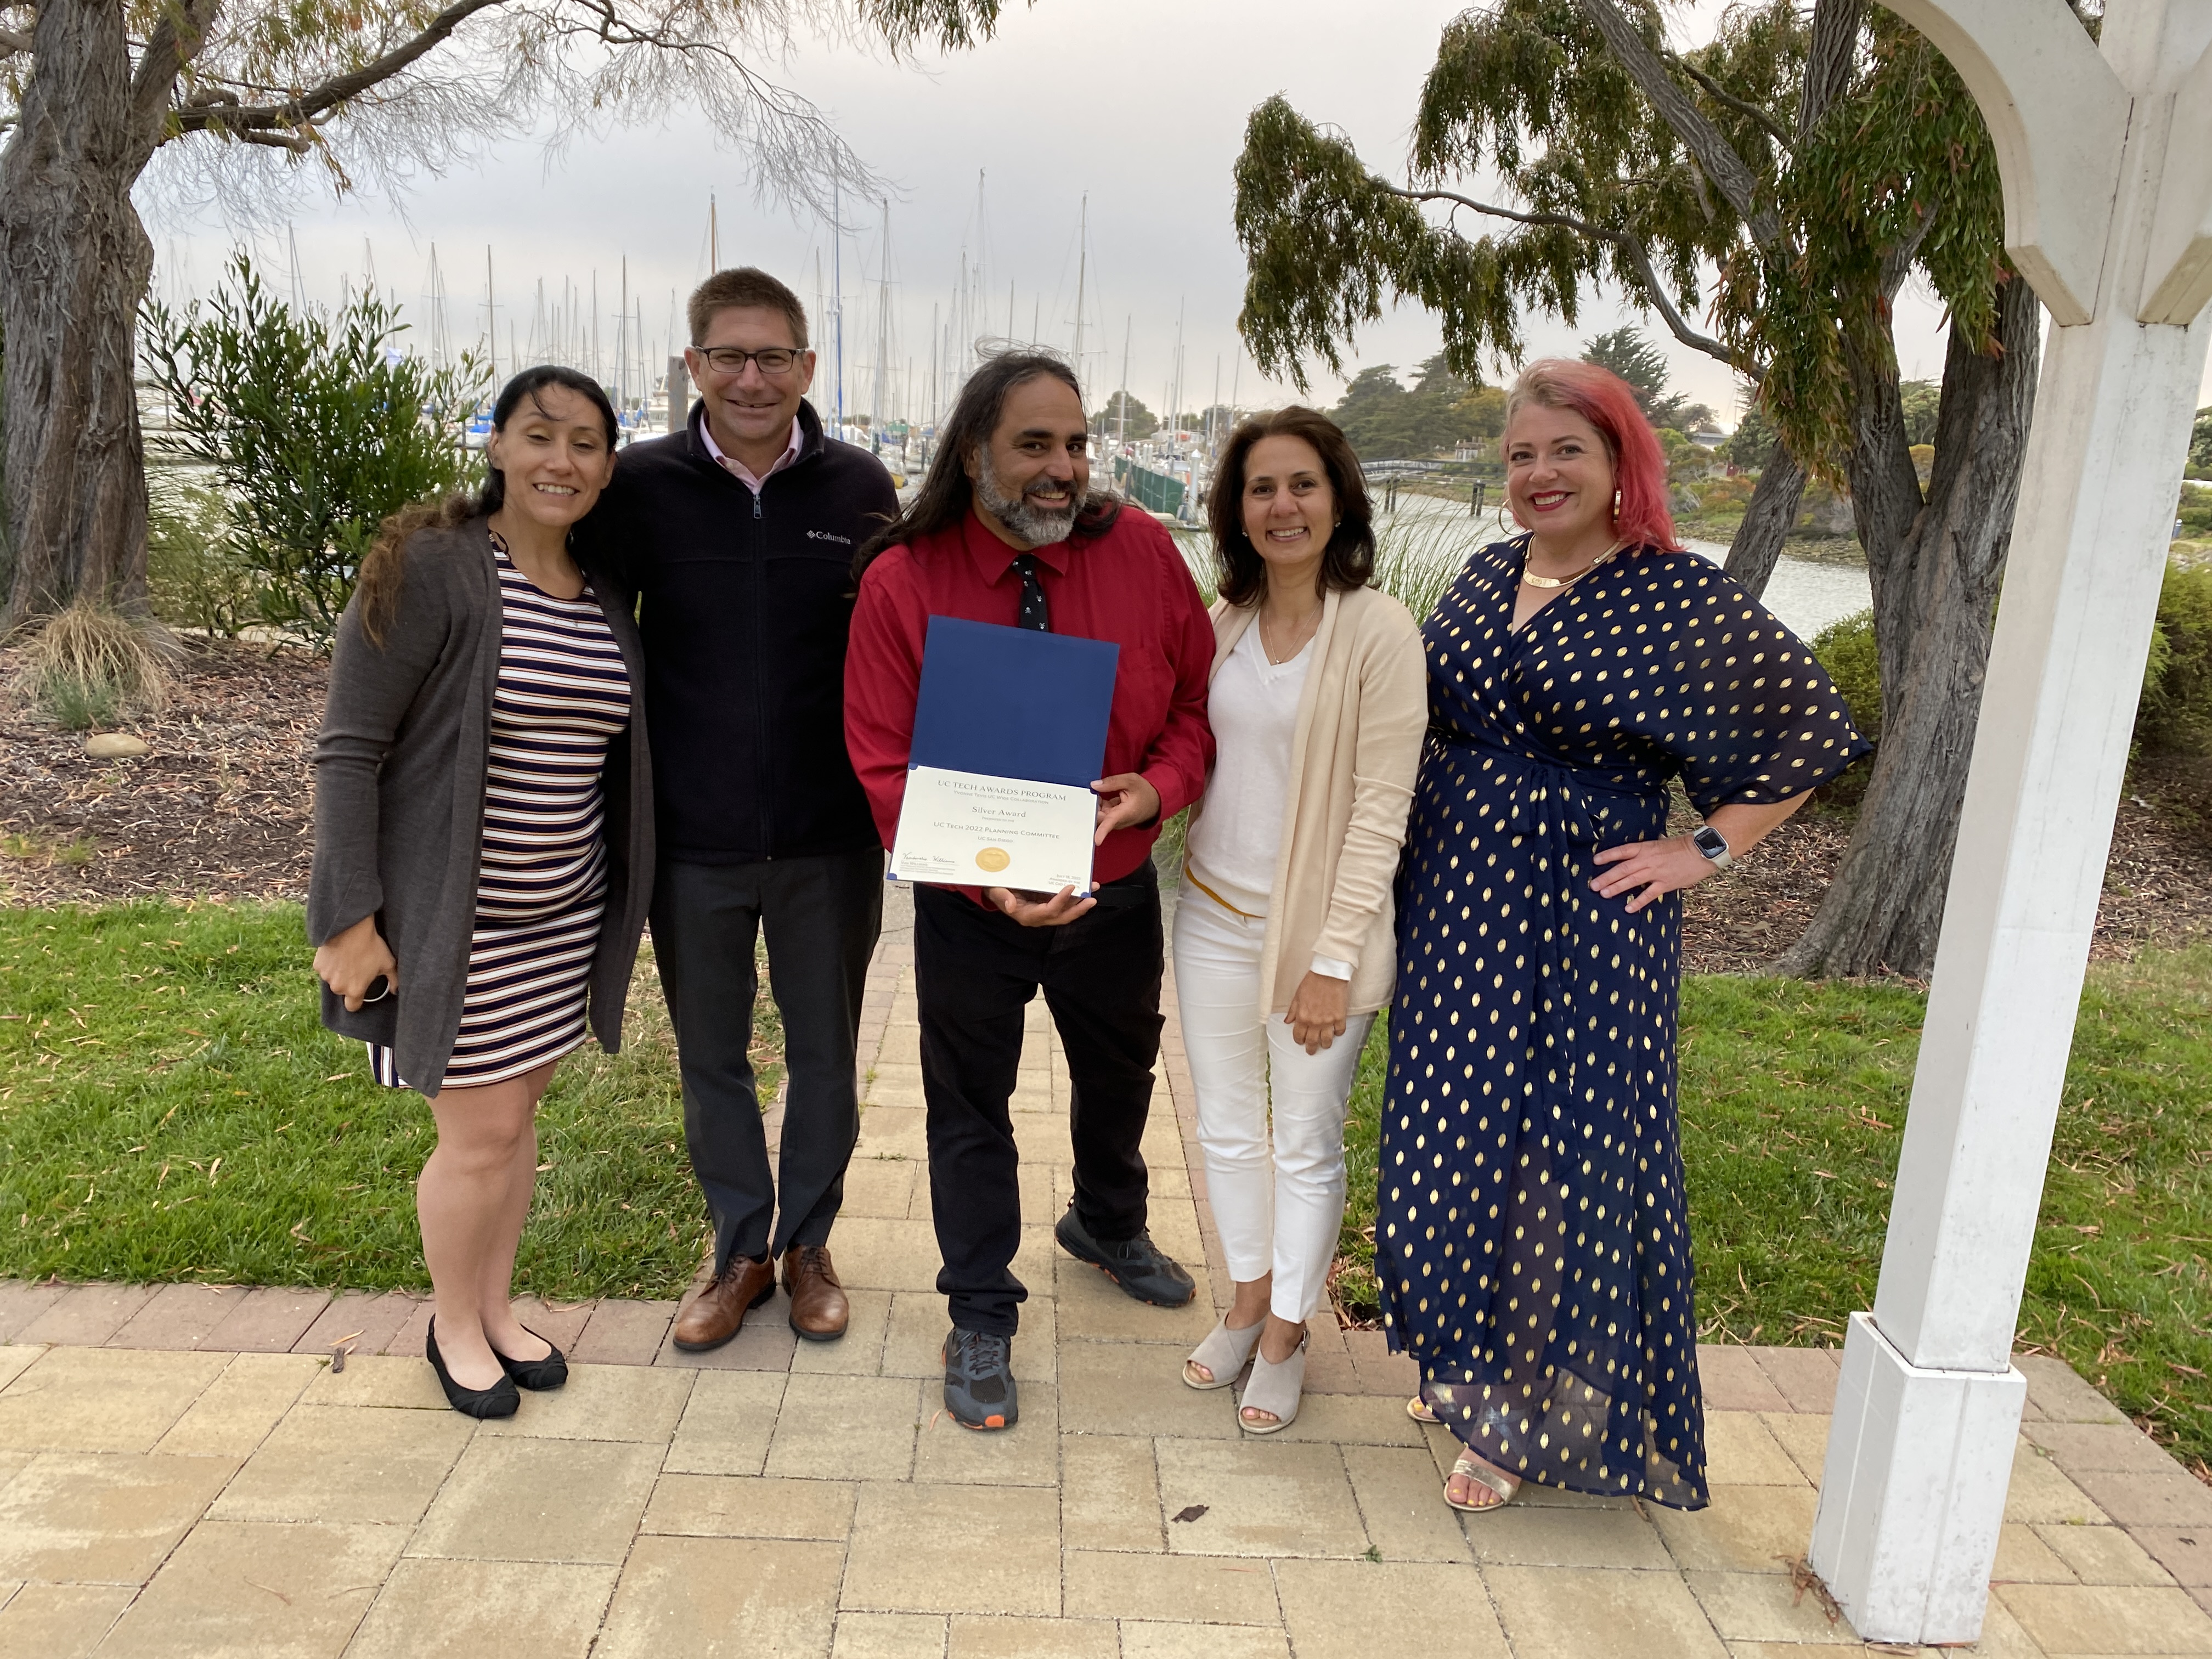 From left, Maria Andrade, Mark Hersberger, Miguel Rodriguez, Mojgan Amini, and Jessica Hilt were on hand to accept the UC Tech Award in Berkeley, CA.